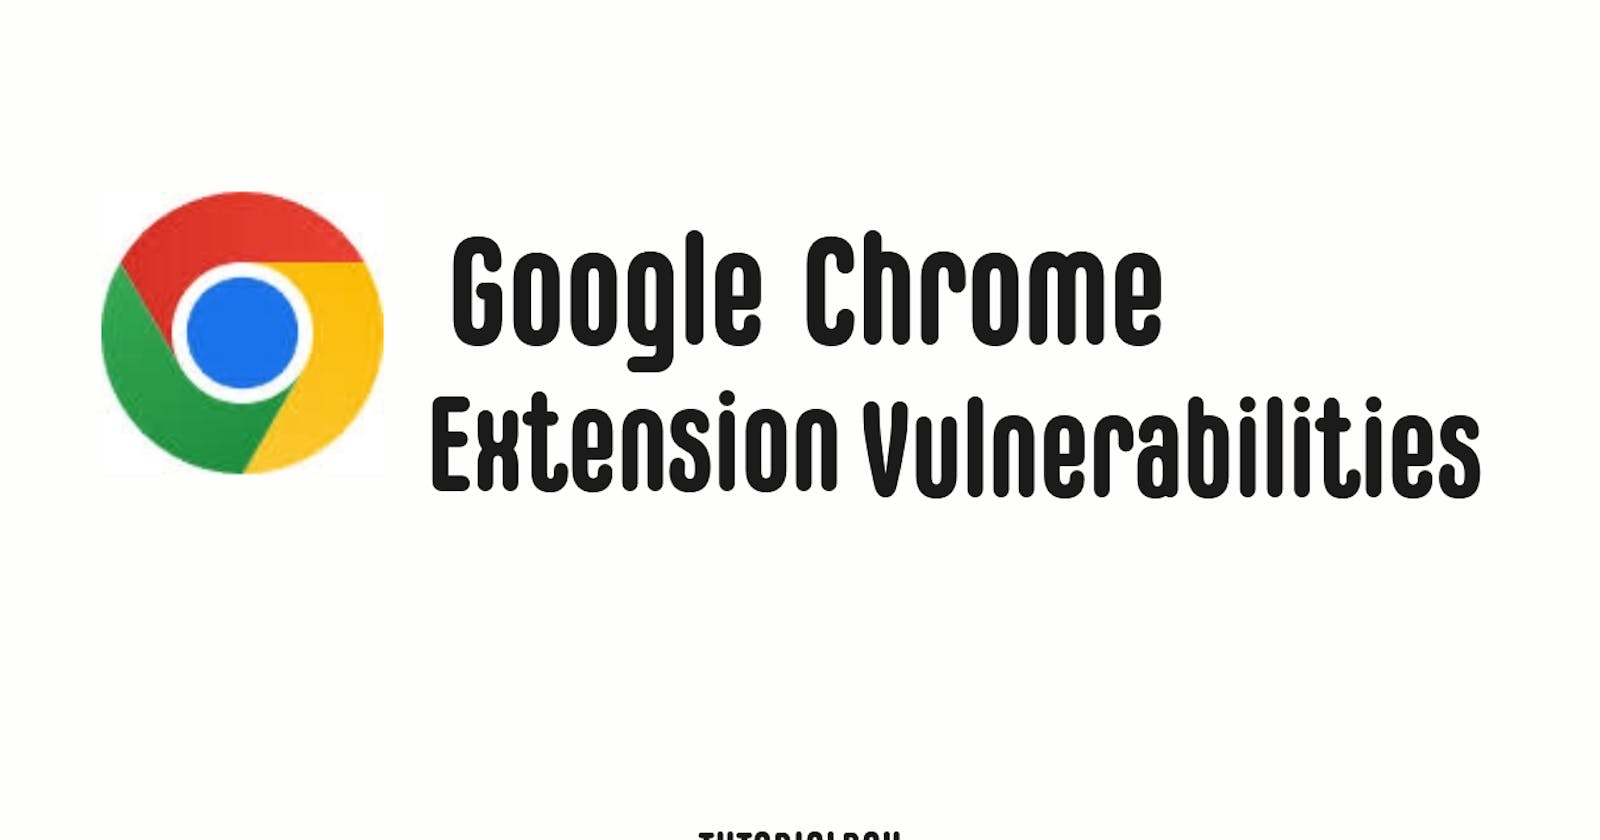 An In-Depth Analysis of Google Chrome Extension Vulnerabilities and Security